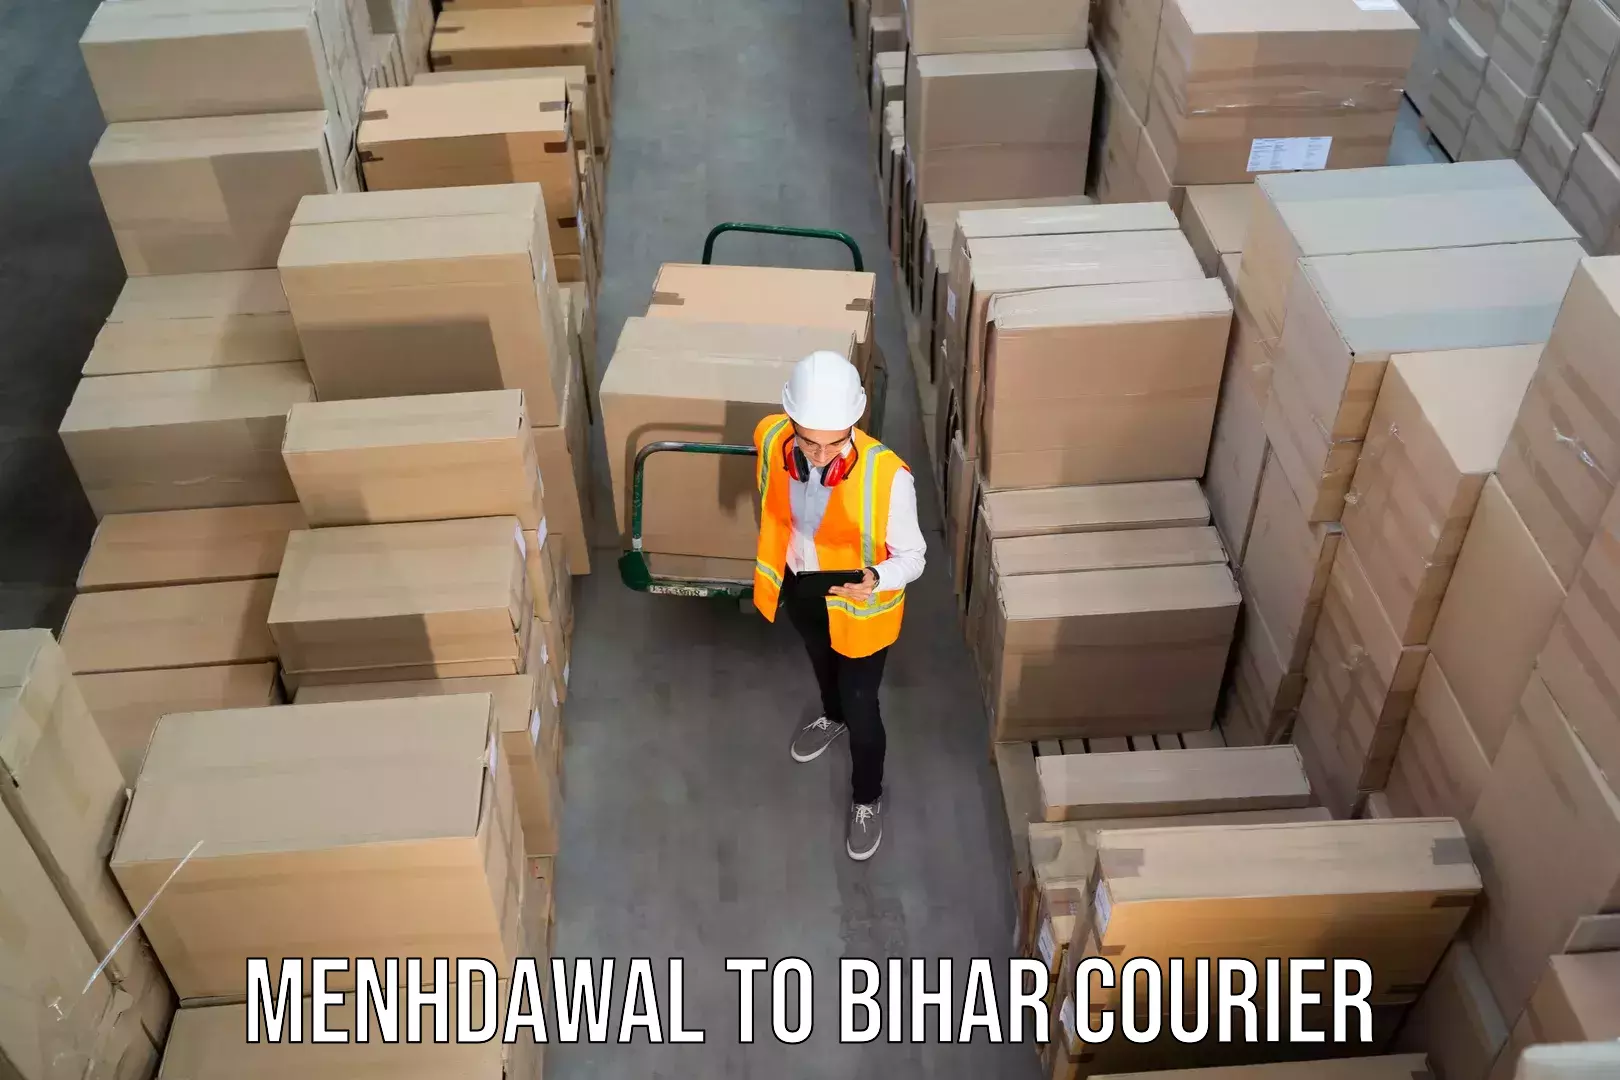 Customer-oriented courier services Menhdawal to Dhaka